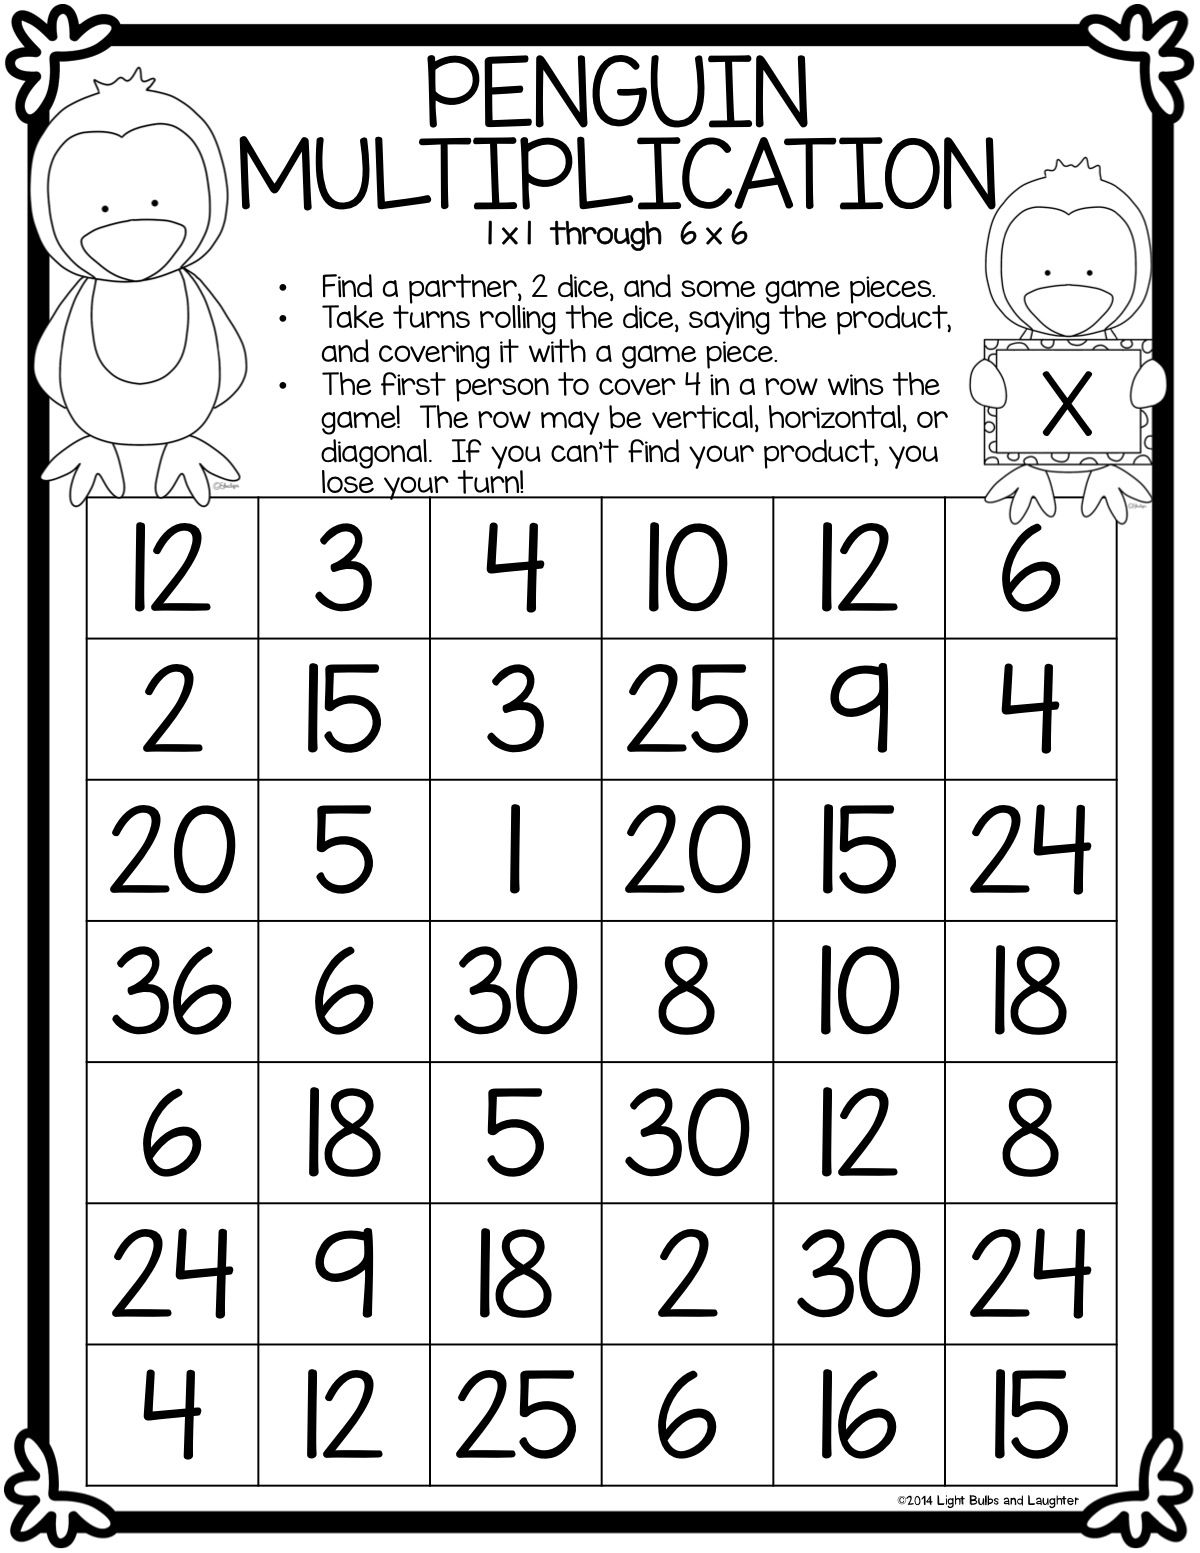 Free Penguin Multiplication Game - Perfect Review For The within Connect 4 Multiplication Printable